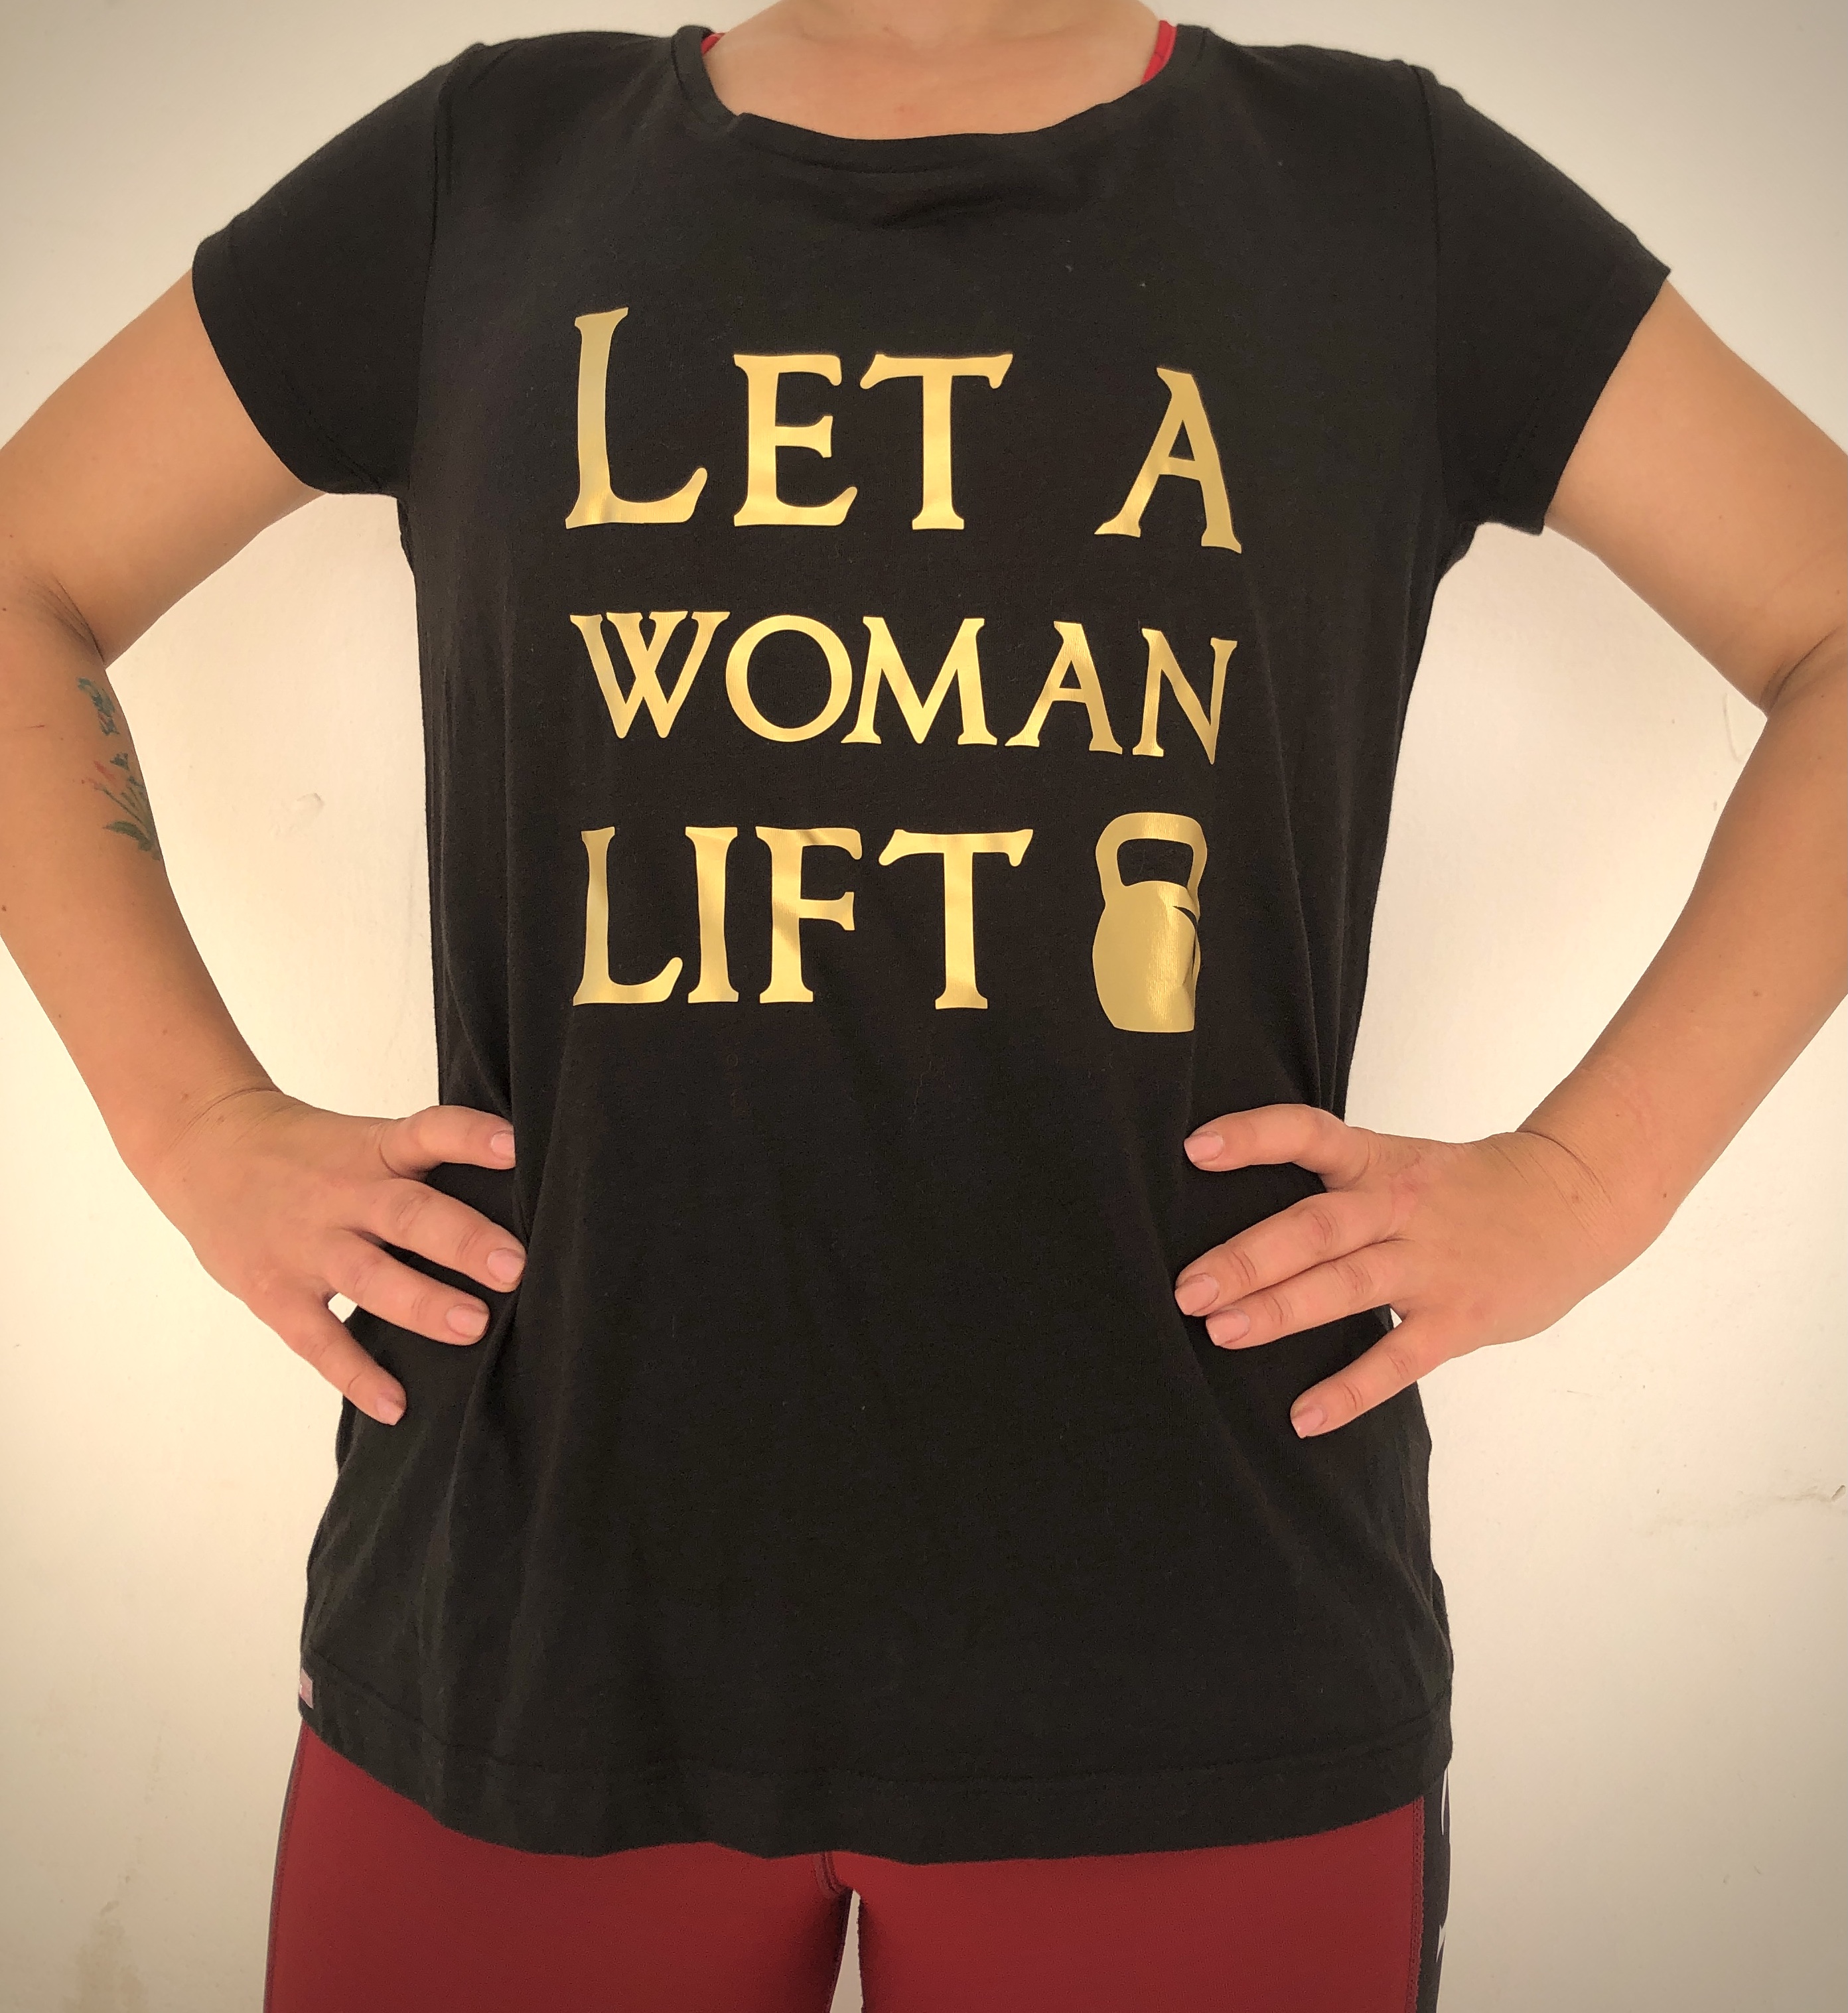 Loose fit t-shirt/LET A WOMAN LIFT Spartan Fitness Gear